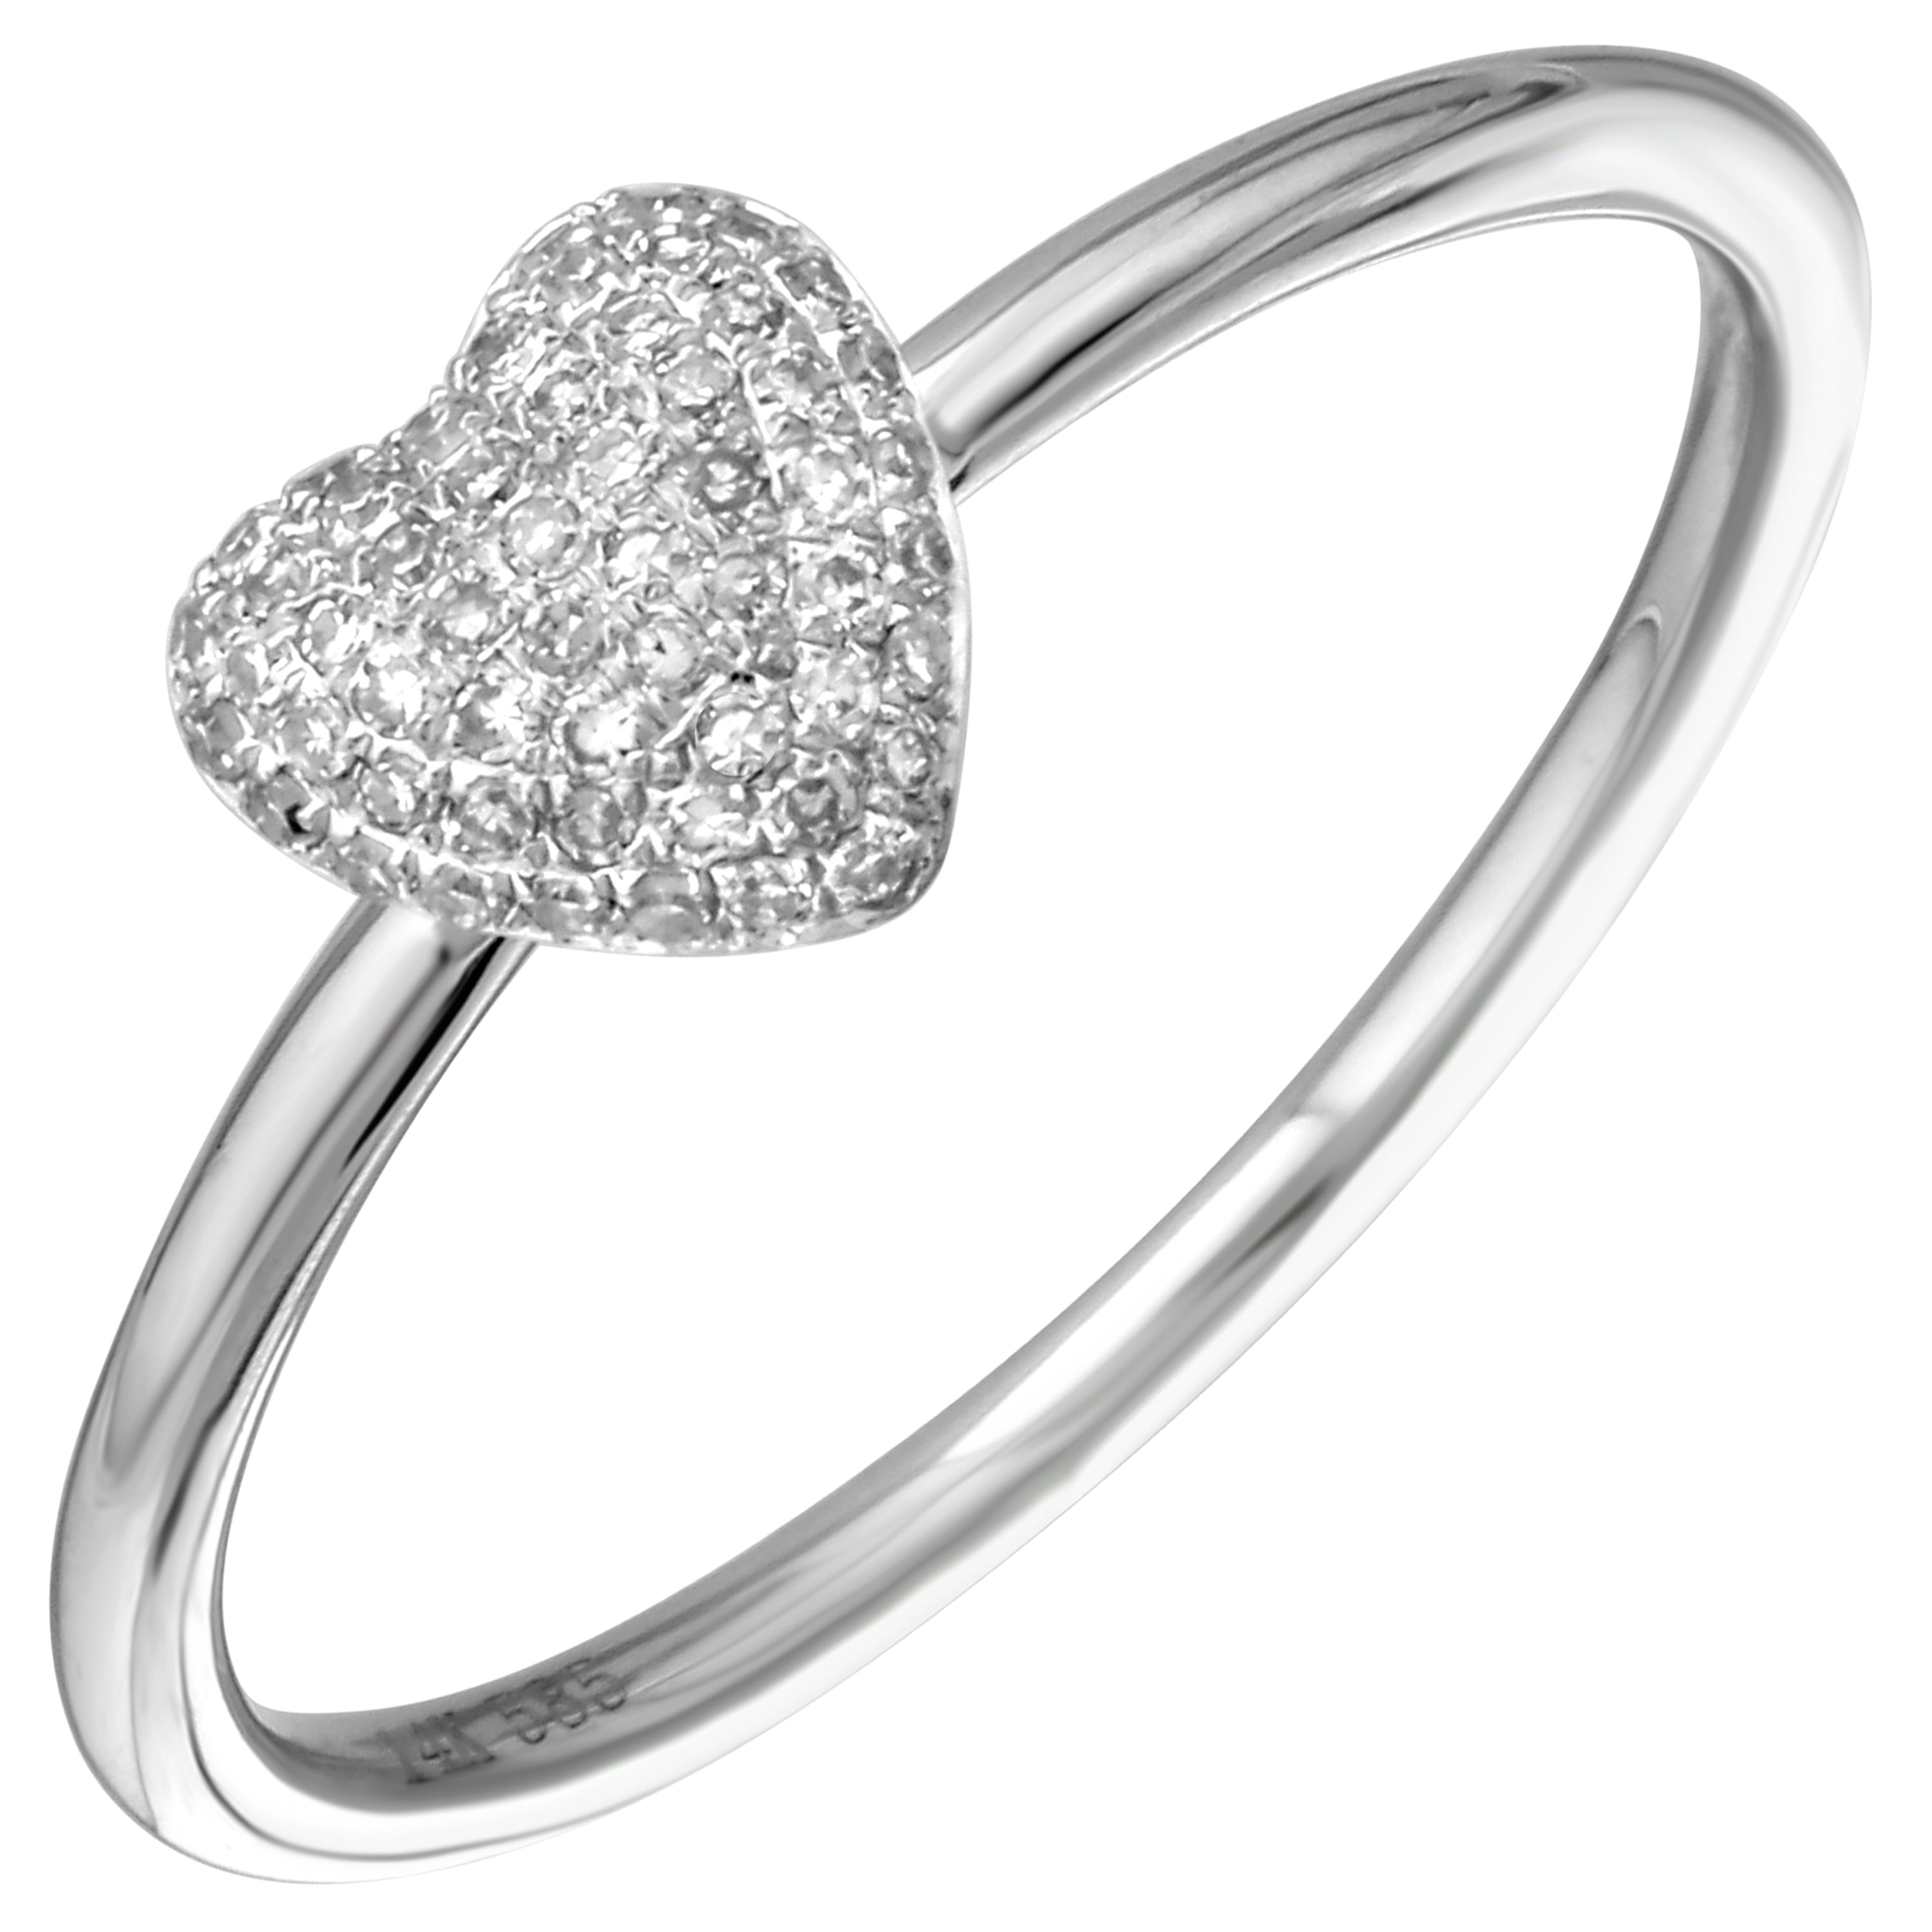 LCD Heart  Shaped Ring  Band 14k White  Gold  0 11 Ct 